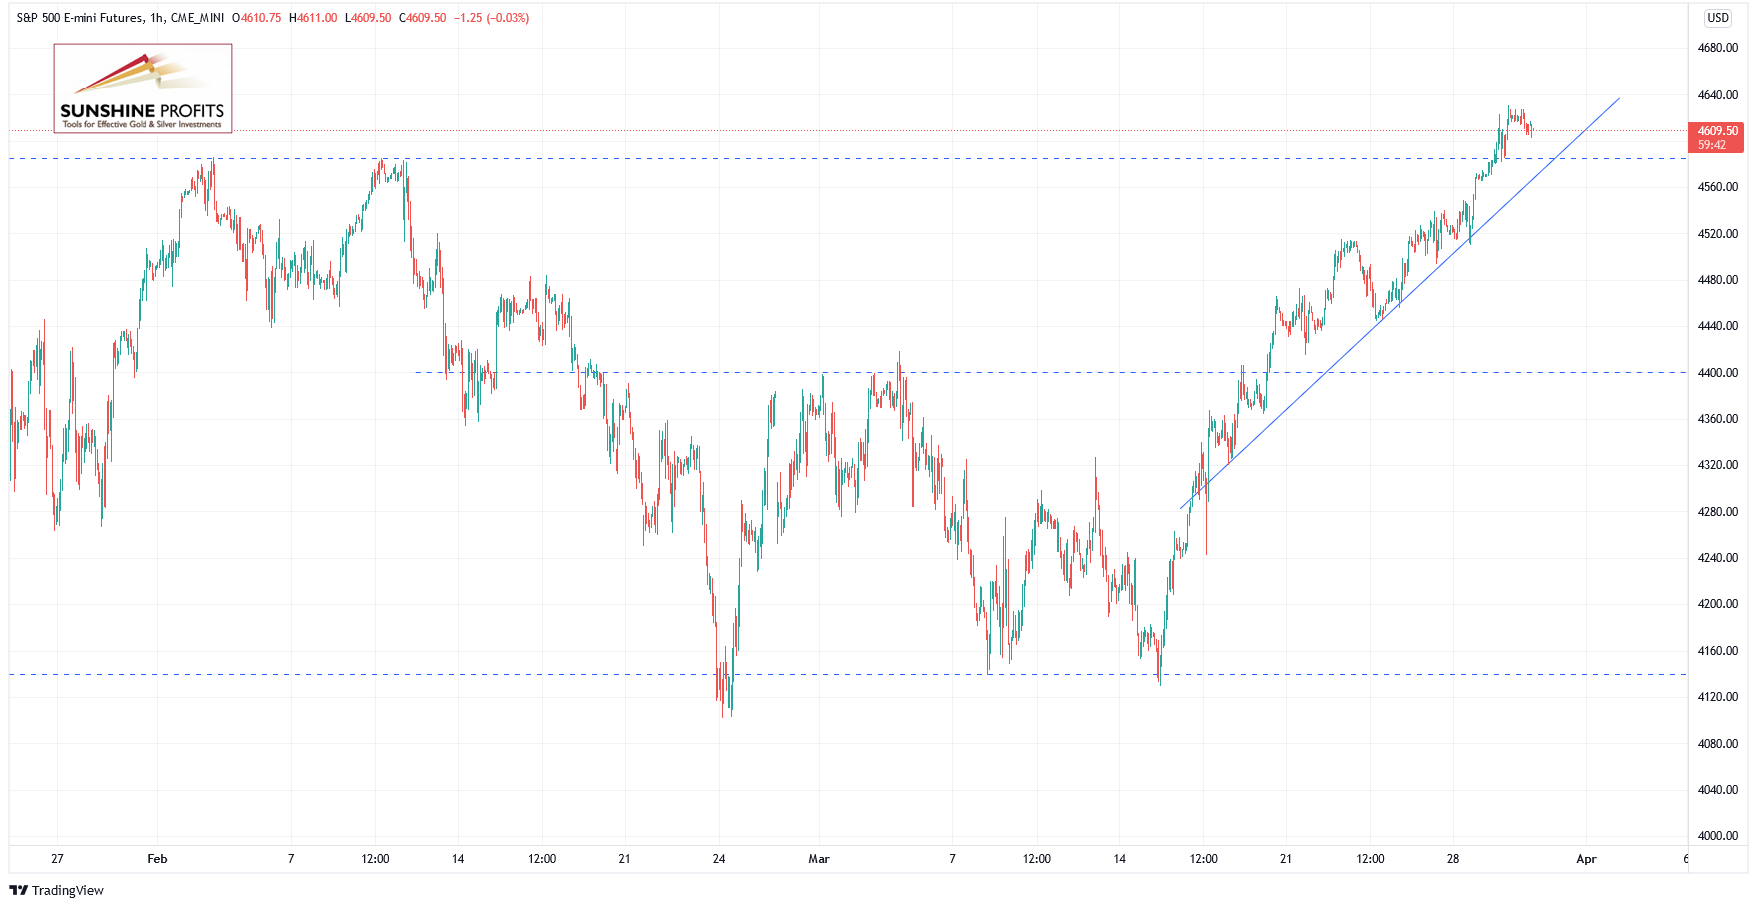 S&P 500 Futures 1-Hour Chart